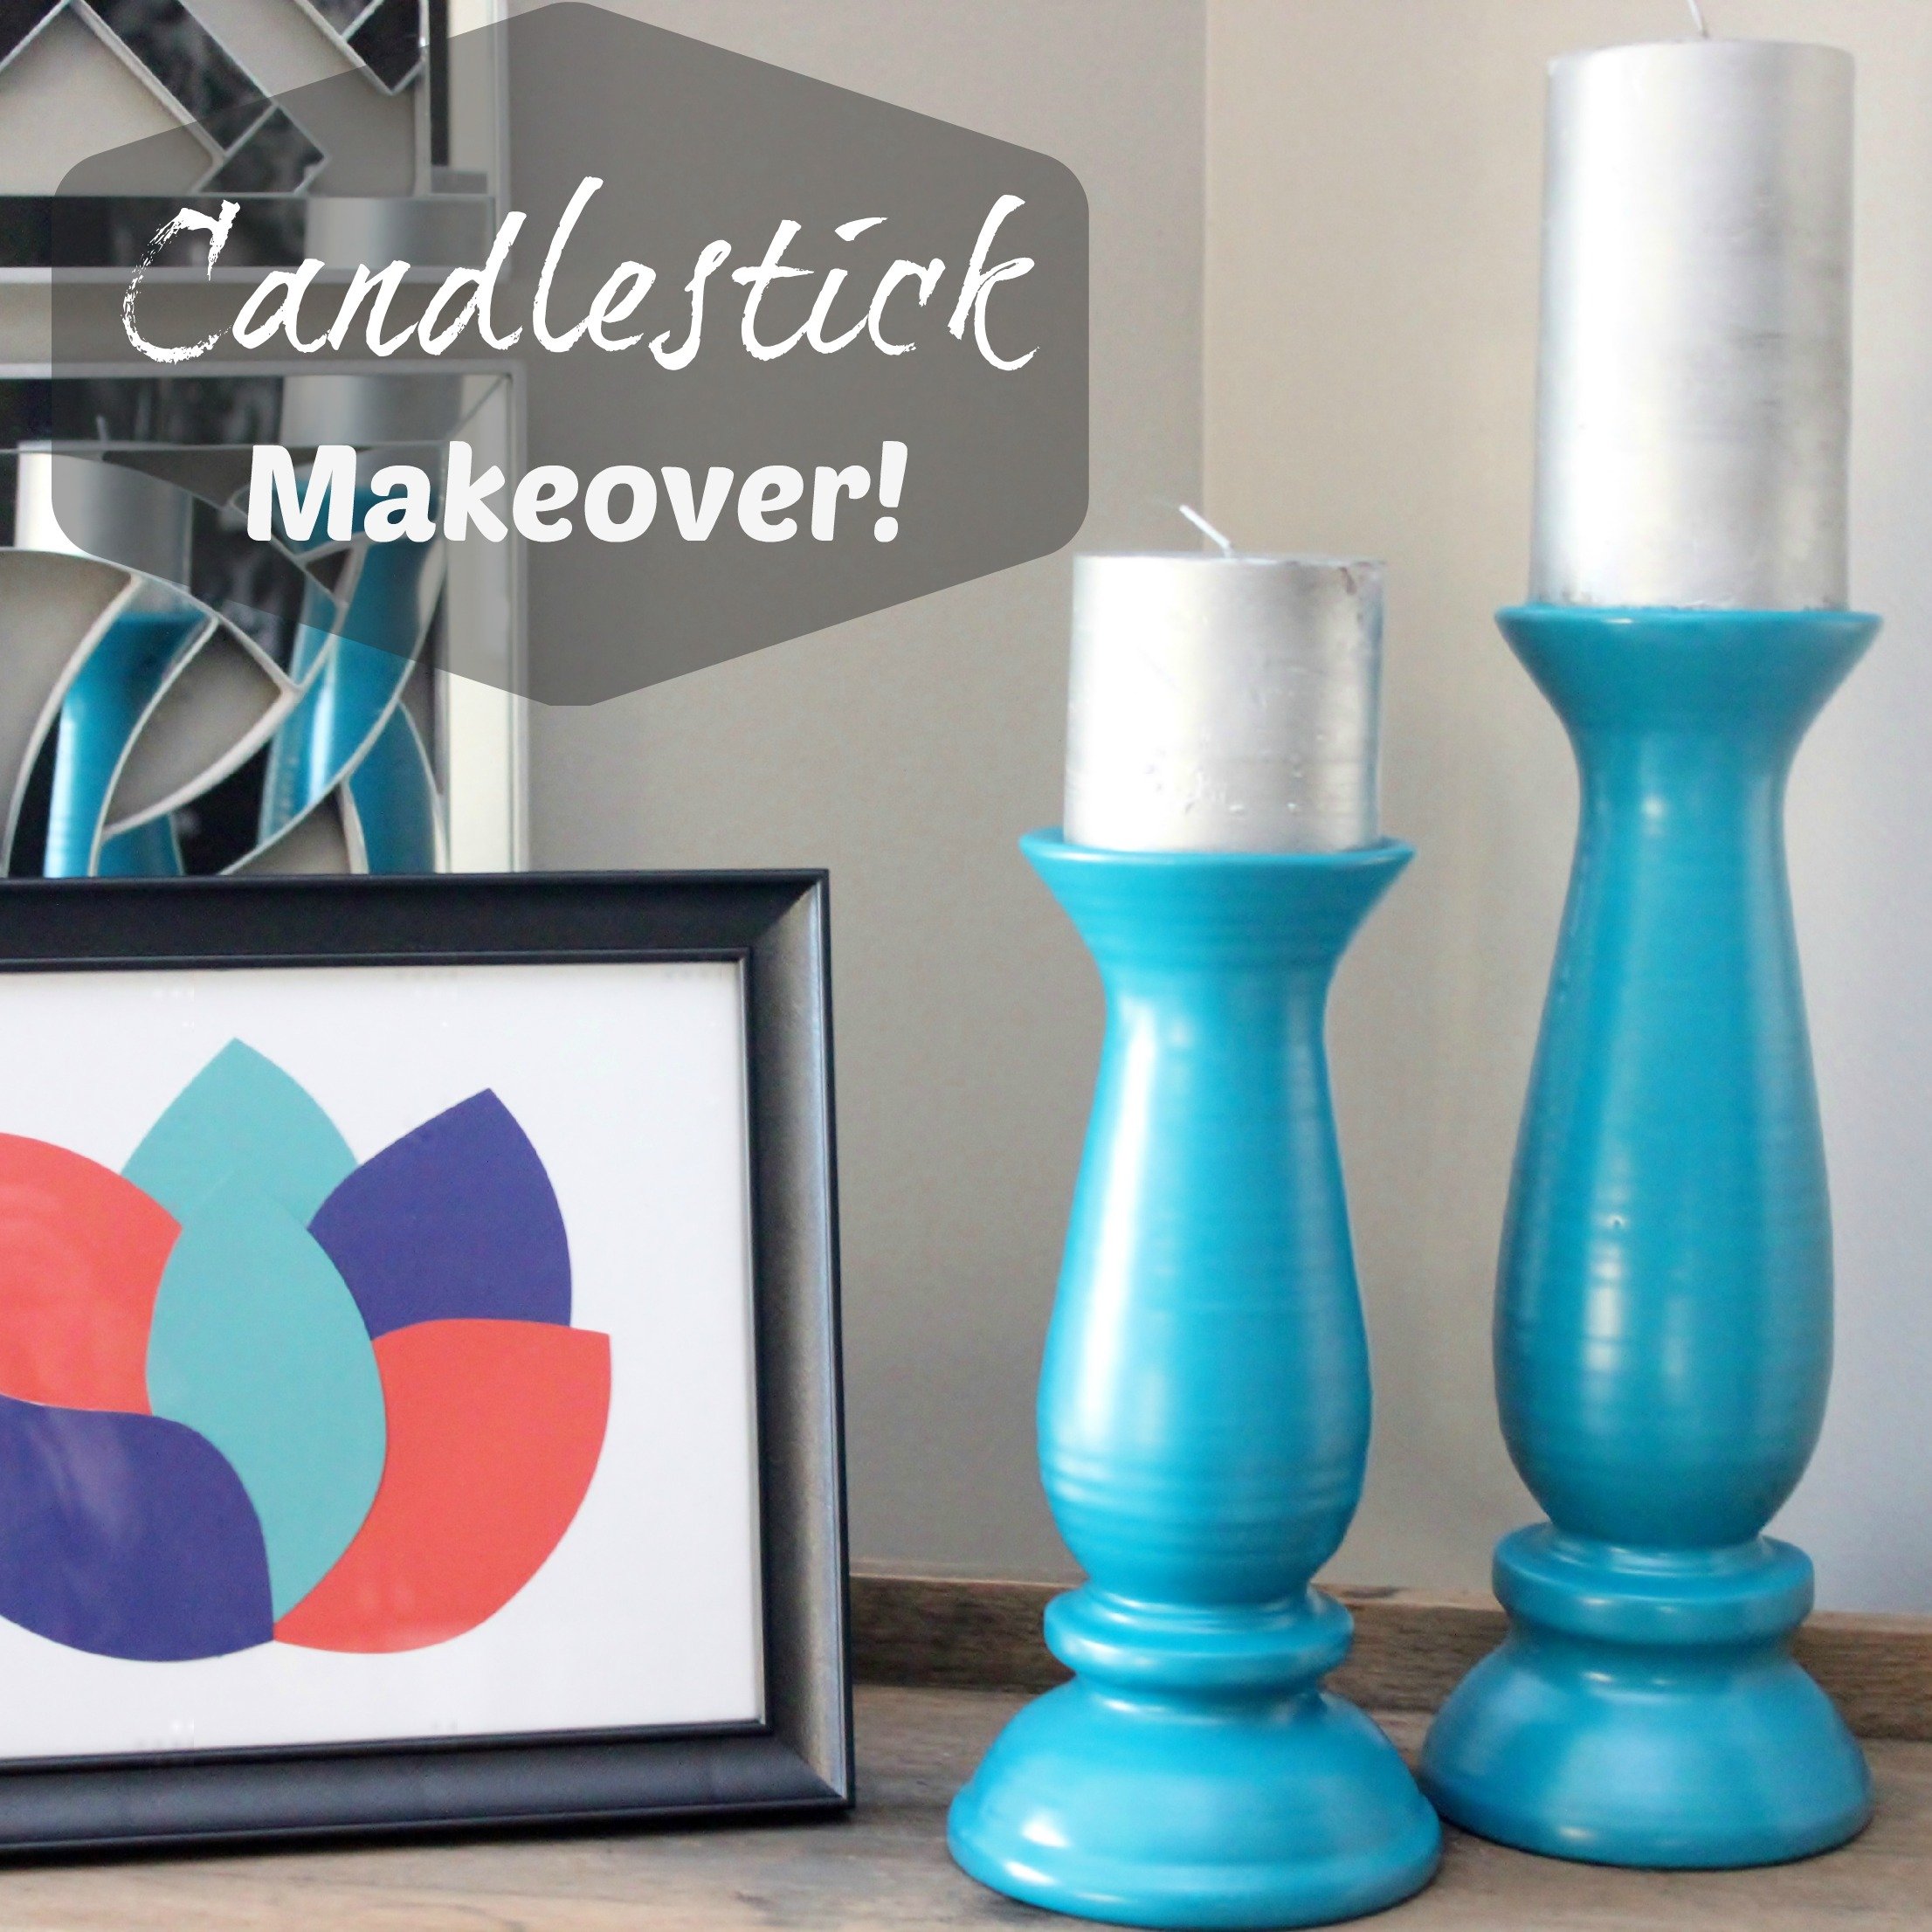 Painted Candlestick Makeover